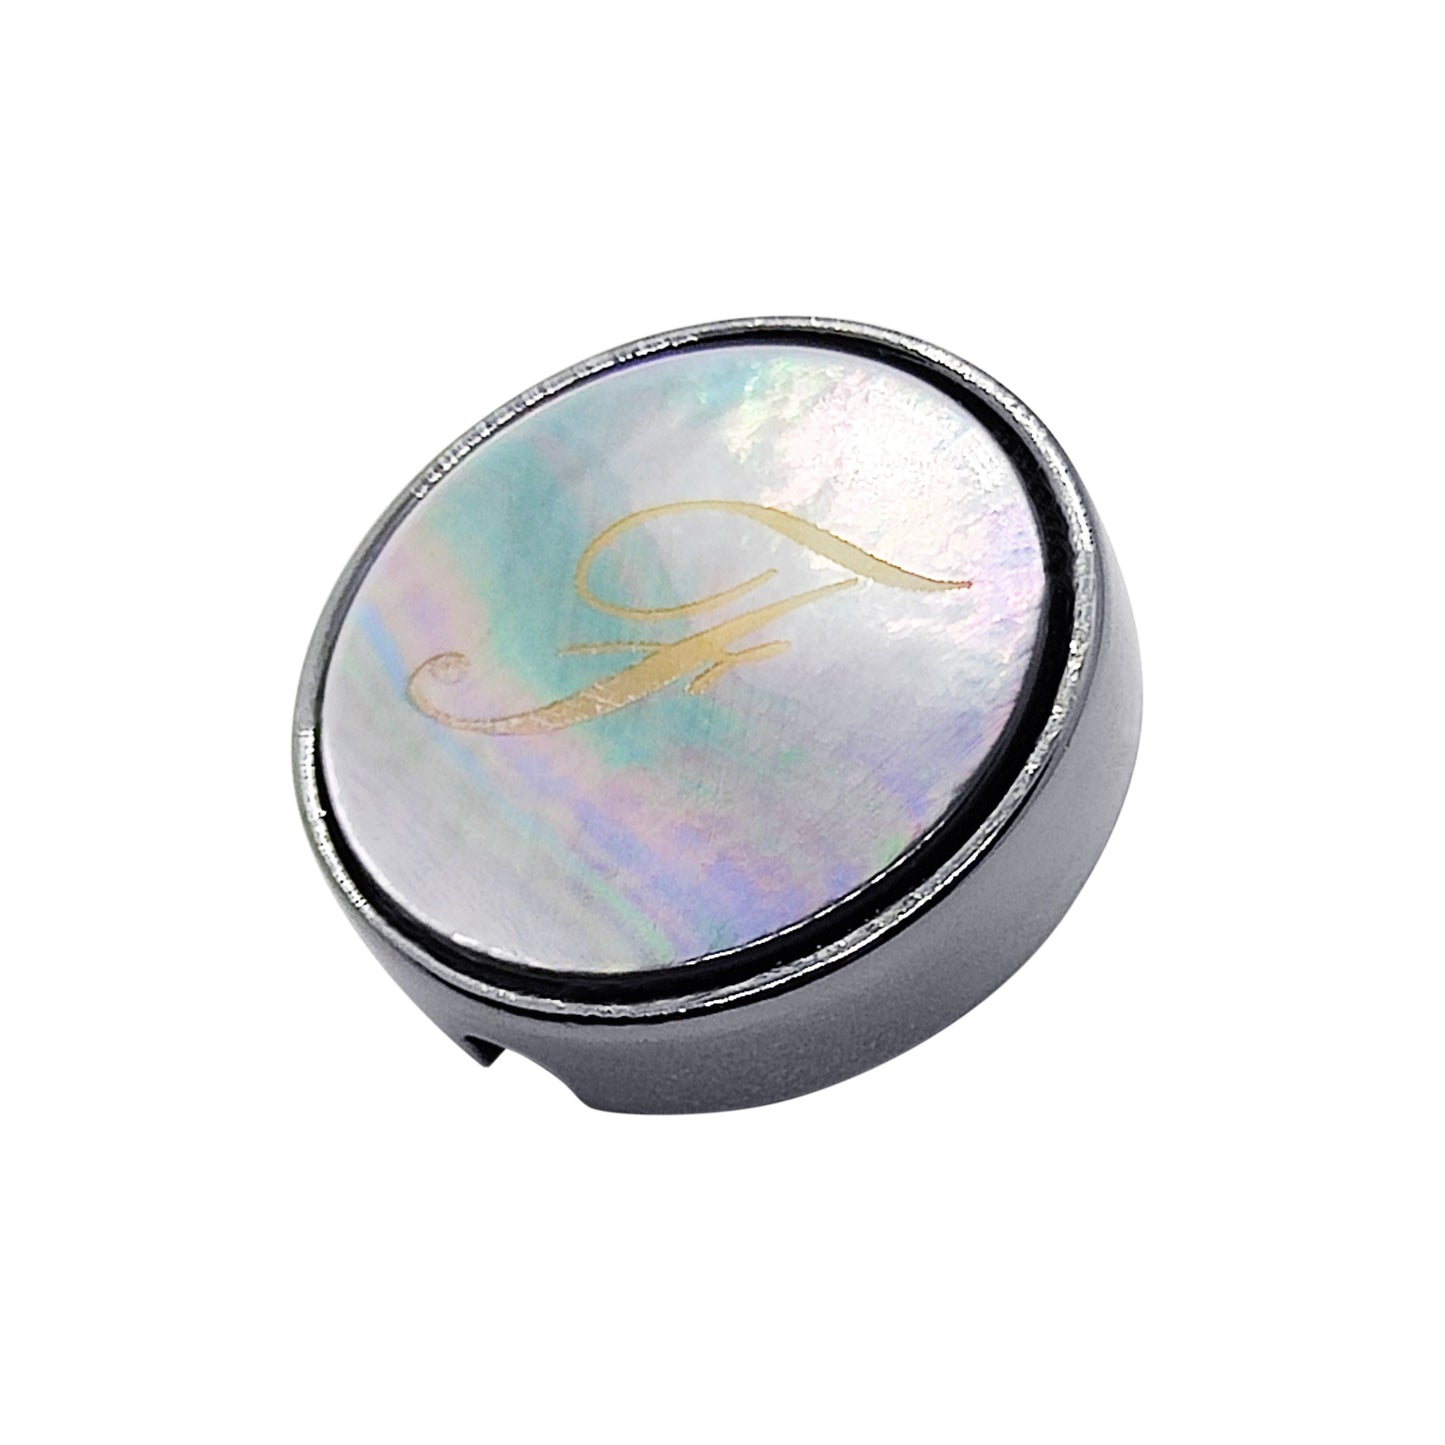 21mm button in carbon metal and black mother-of-pearl